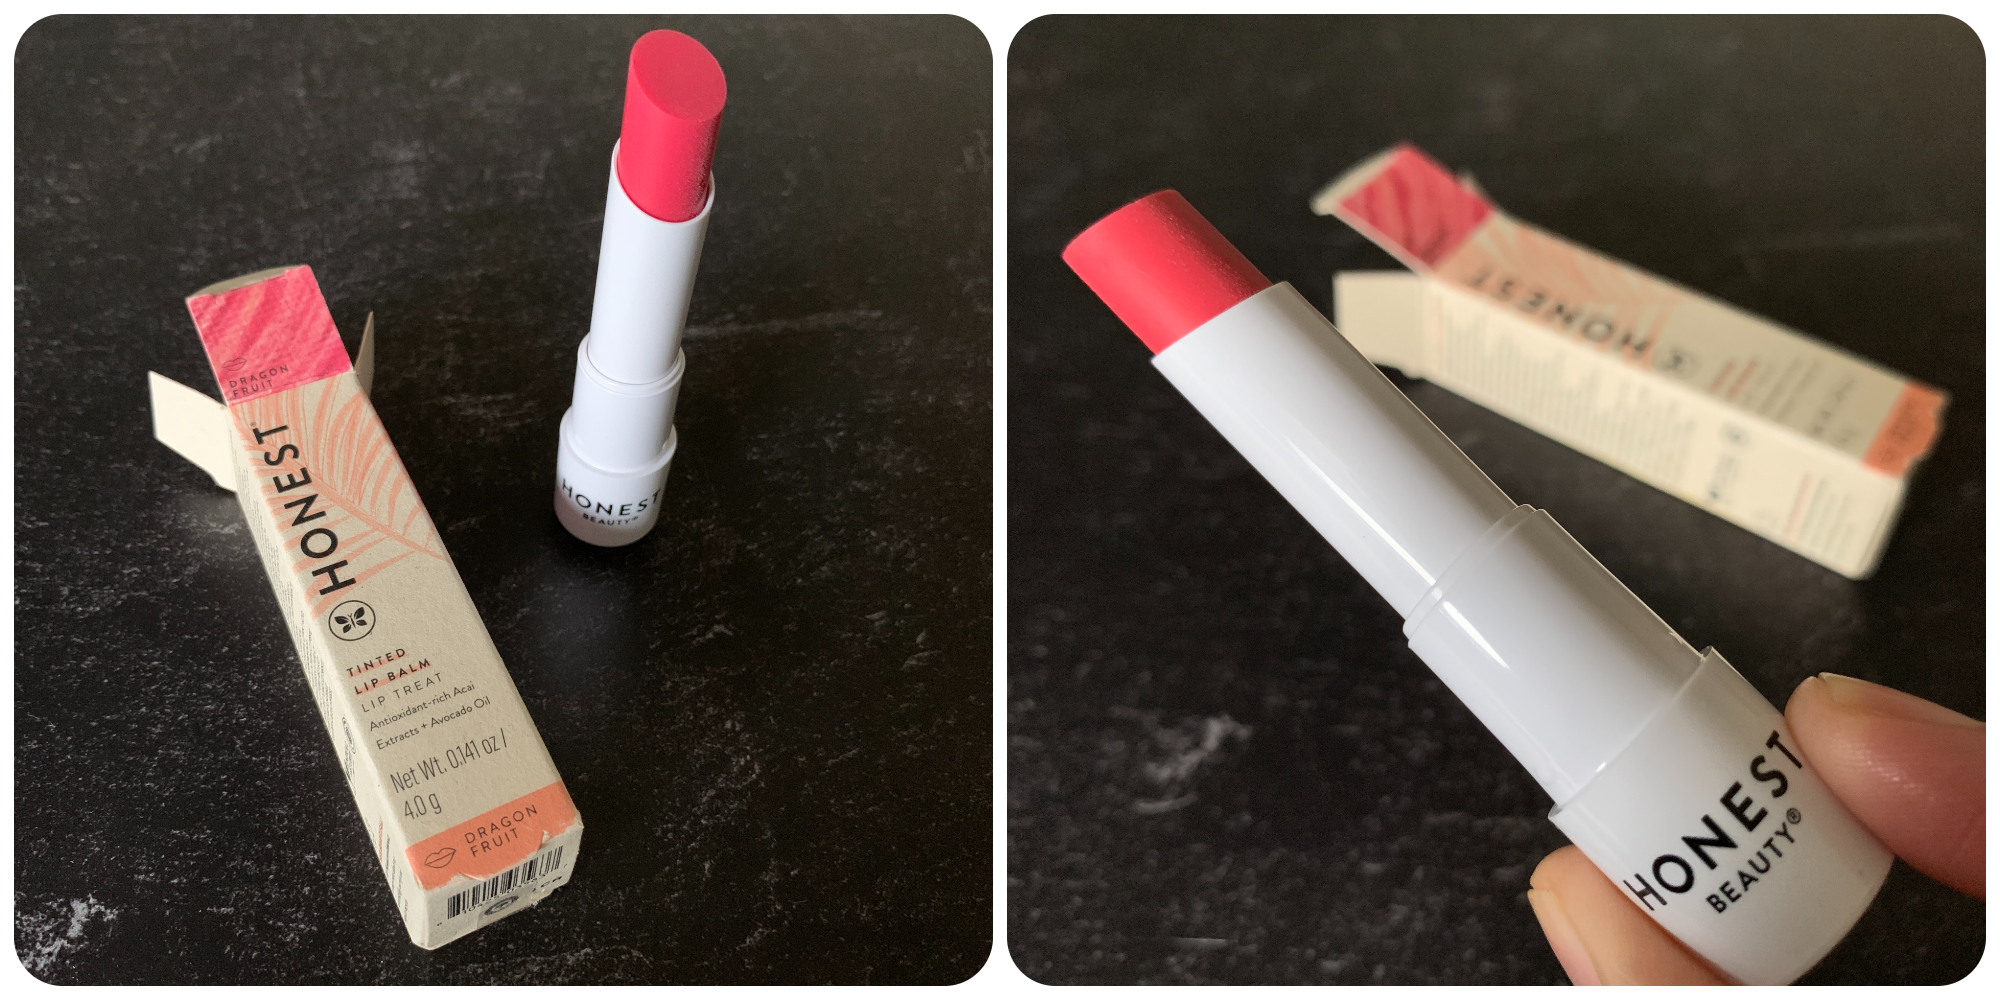 Honest Beauty Tinted Lip Balms: Review & Swatches